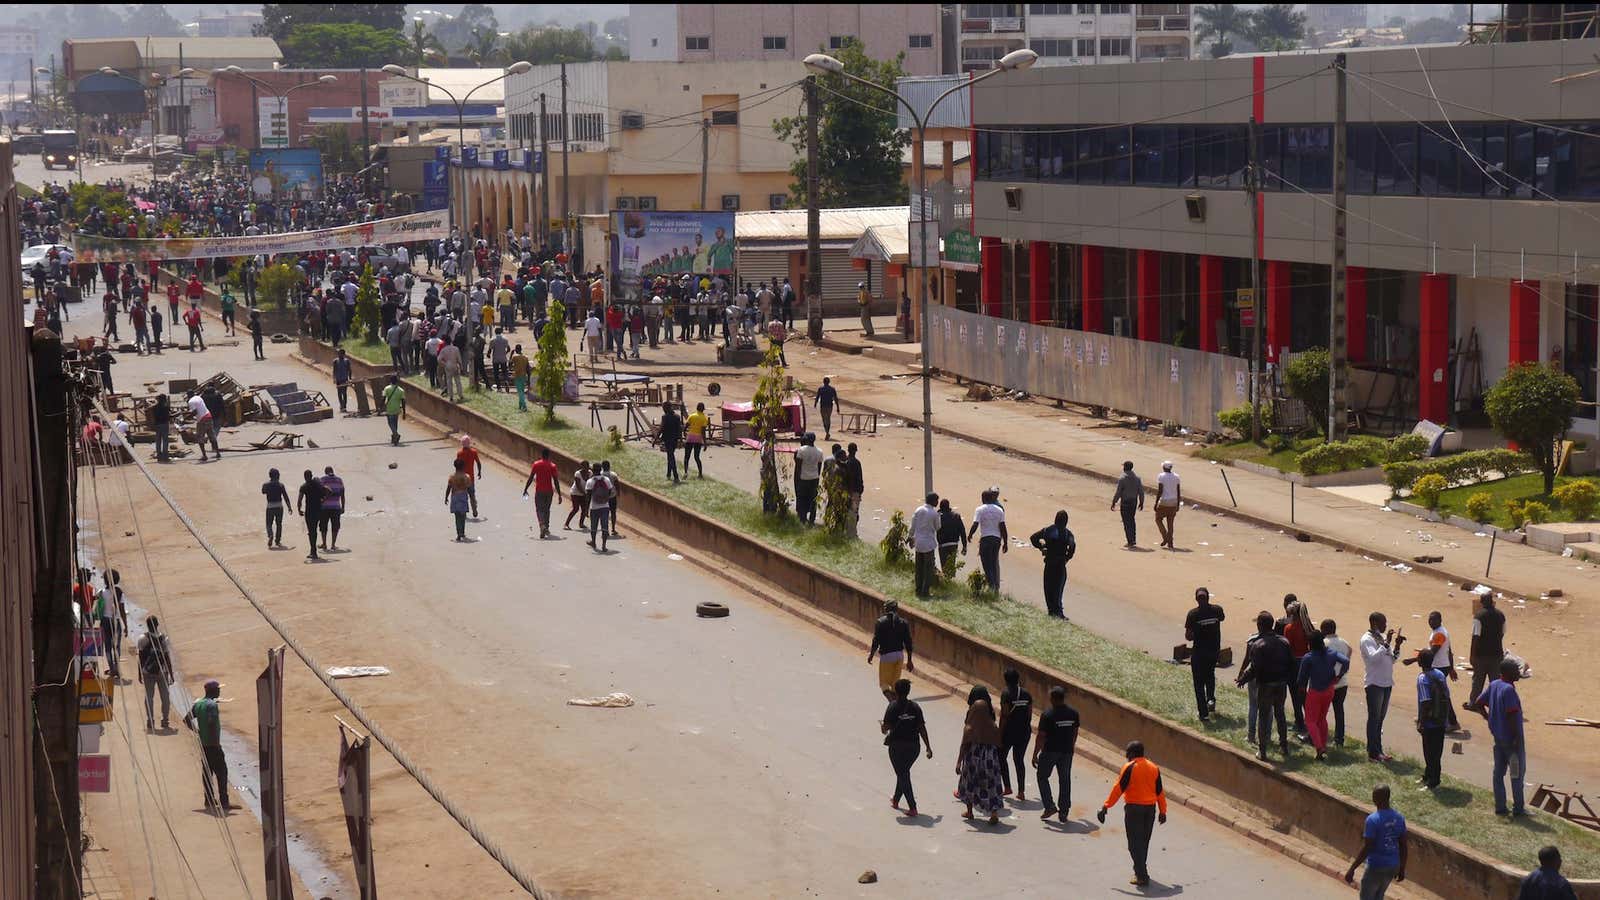 Taking to the streets in Bamenda, Cameroon.